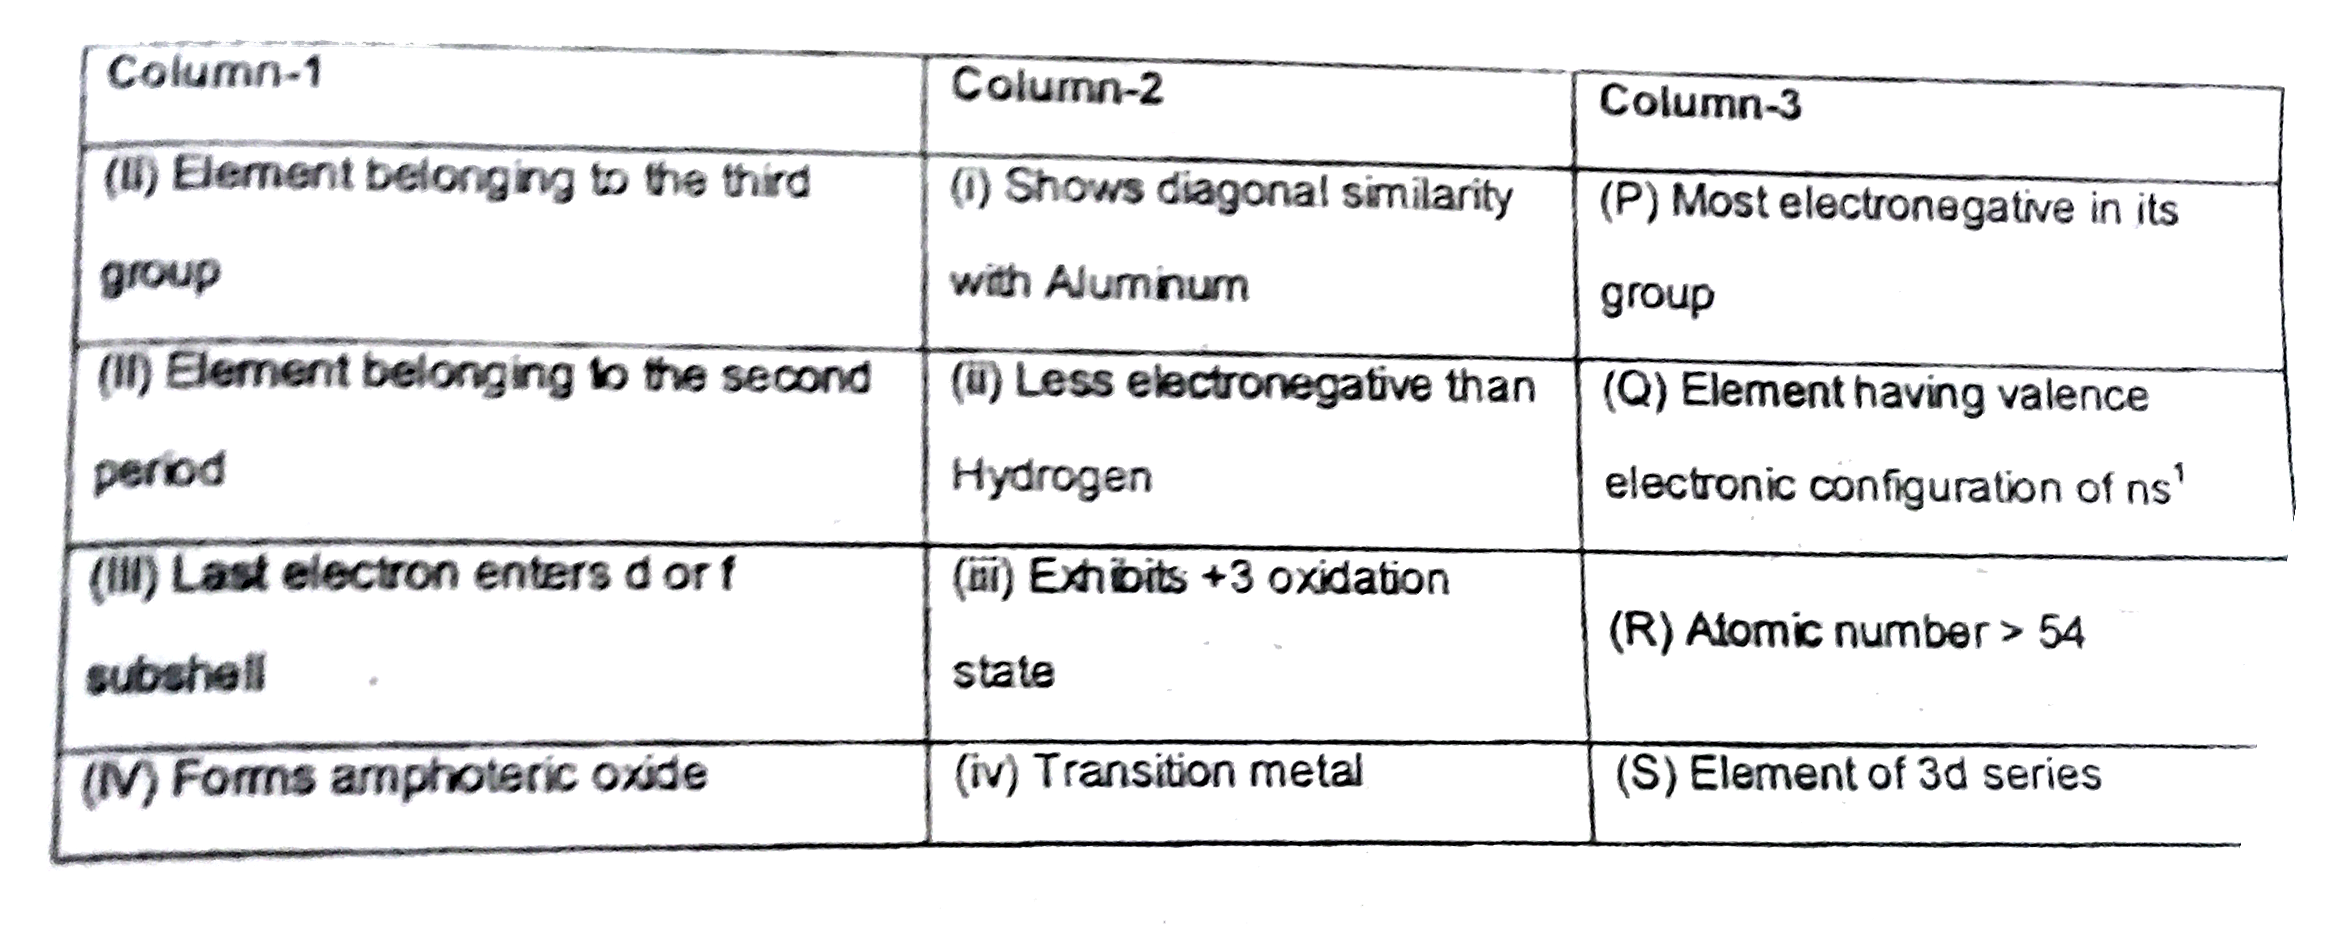 Modern peroidic table helps classify elements according to their similarities.Consider the columns mentioning certain details about elements with comments on their important features.   Answer the question that follow :      Which of the following combinations is appropriate for Beryllium ?